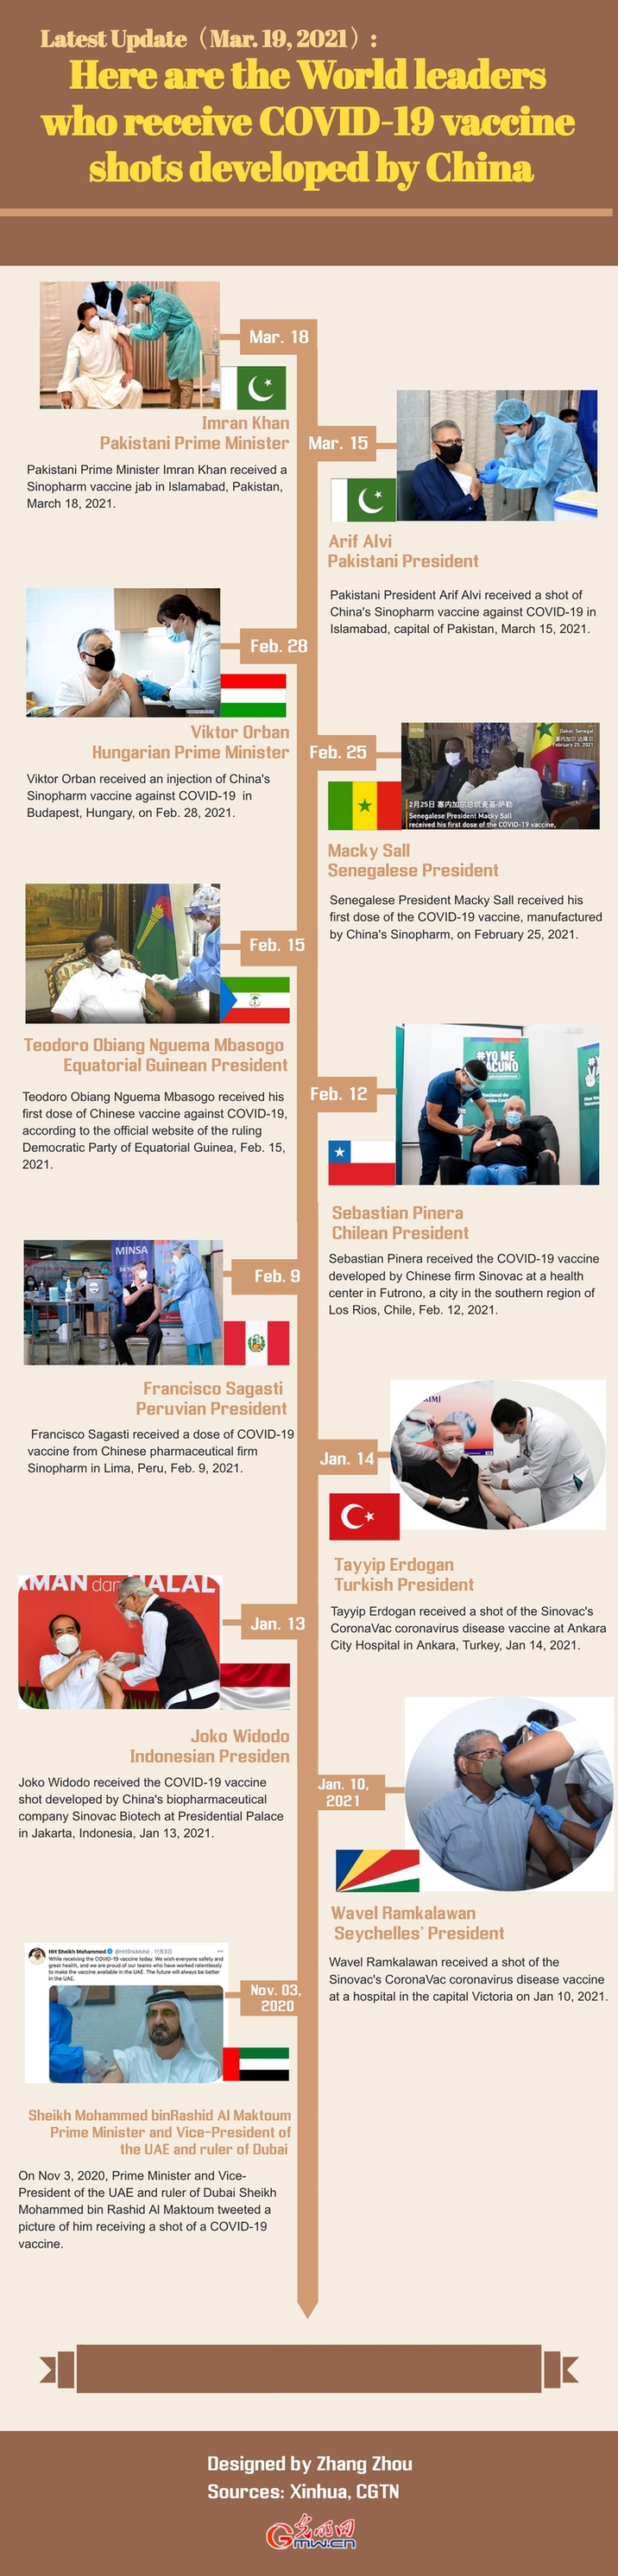 Infographic: Here are the world leaders who receive COVID-19 vaccine shots developed by China (Mar. 19, 2021)